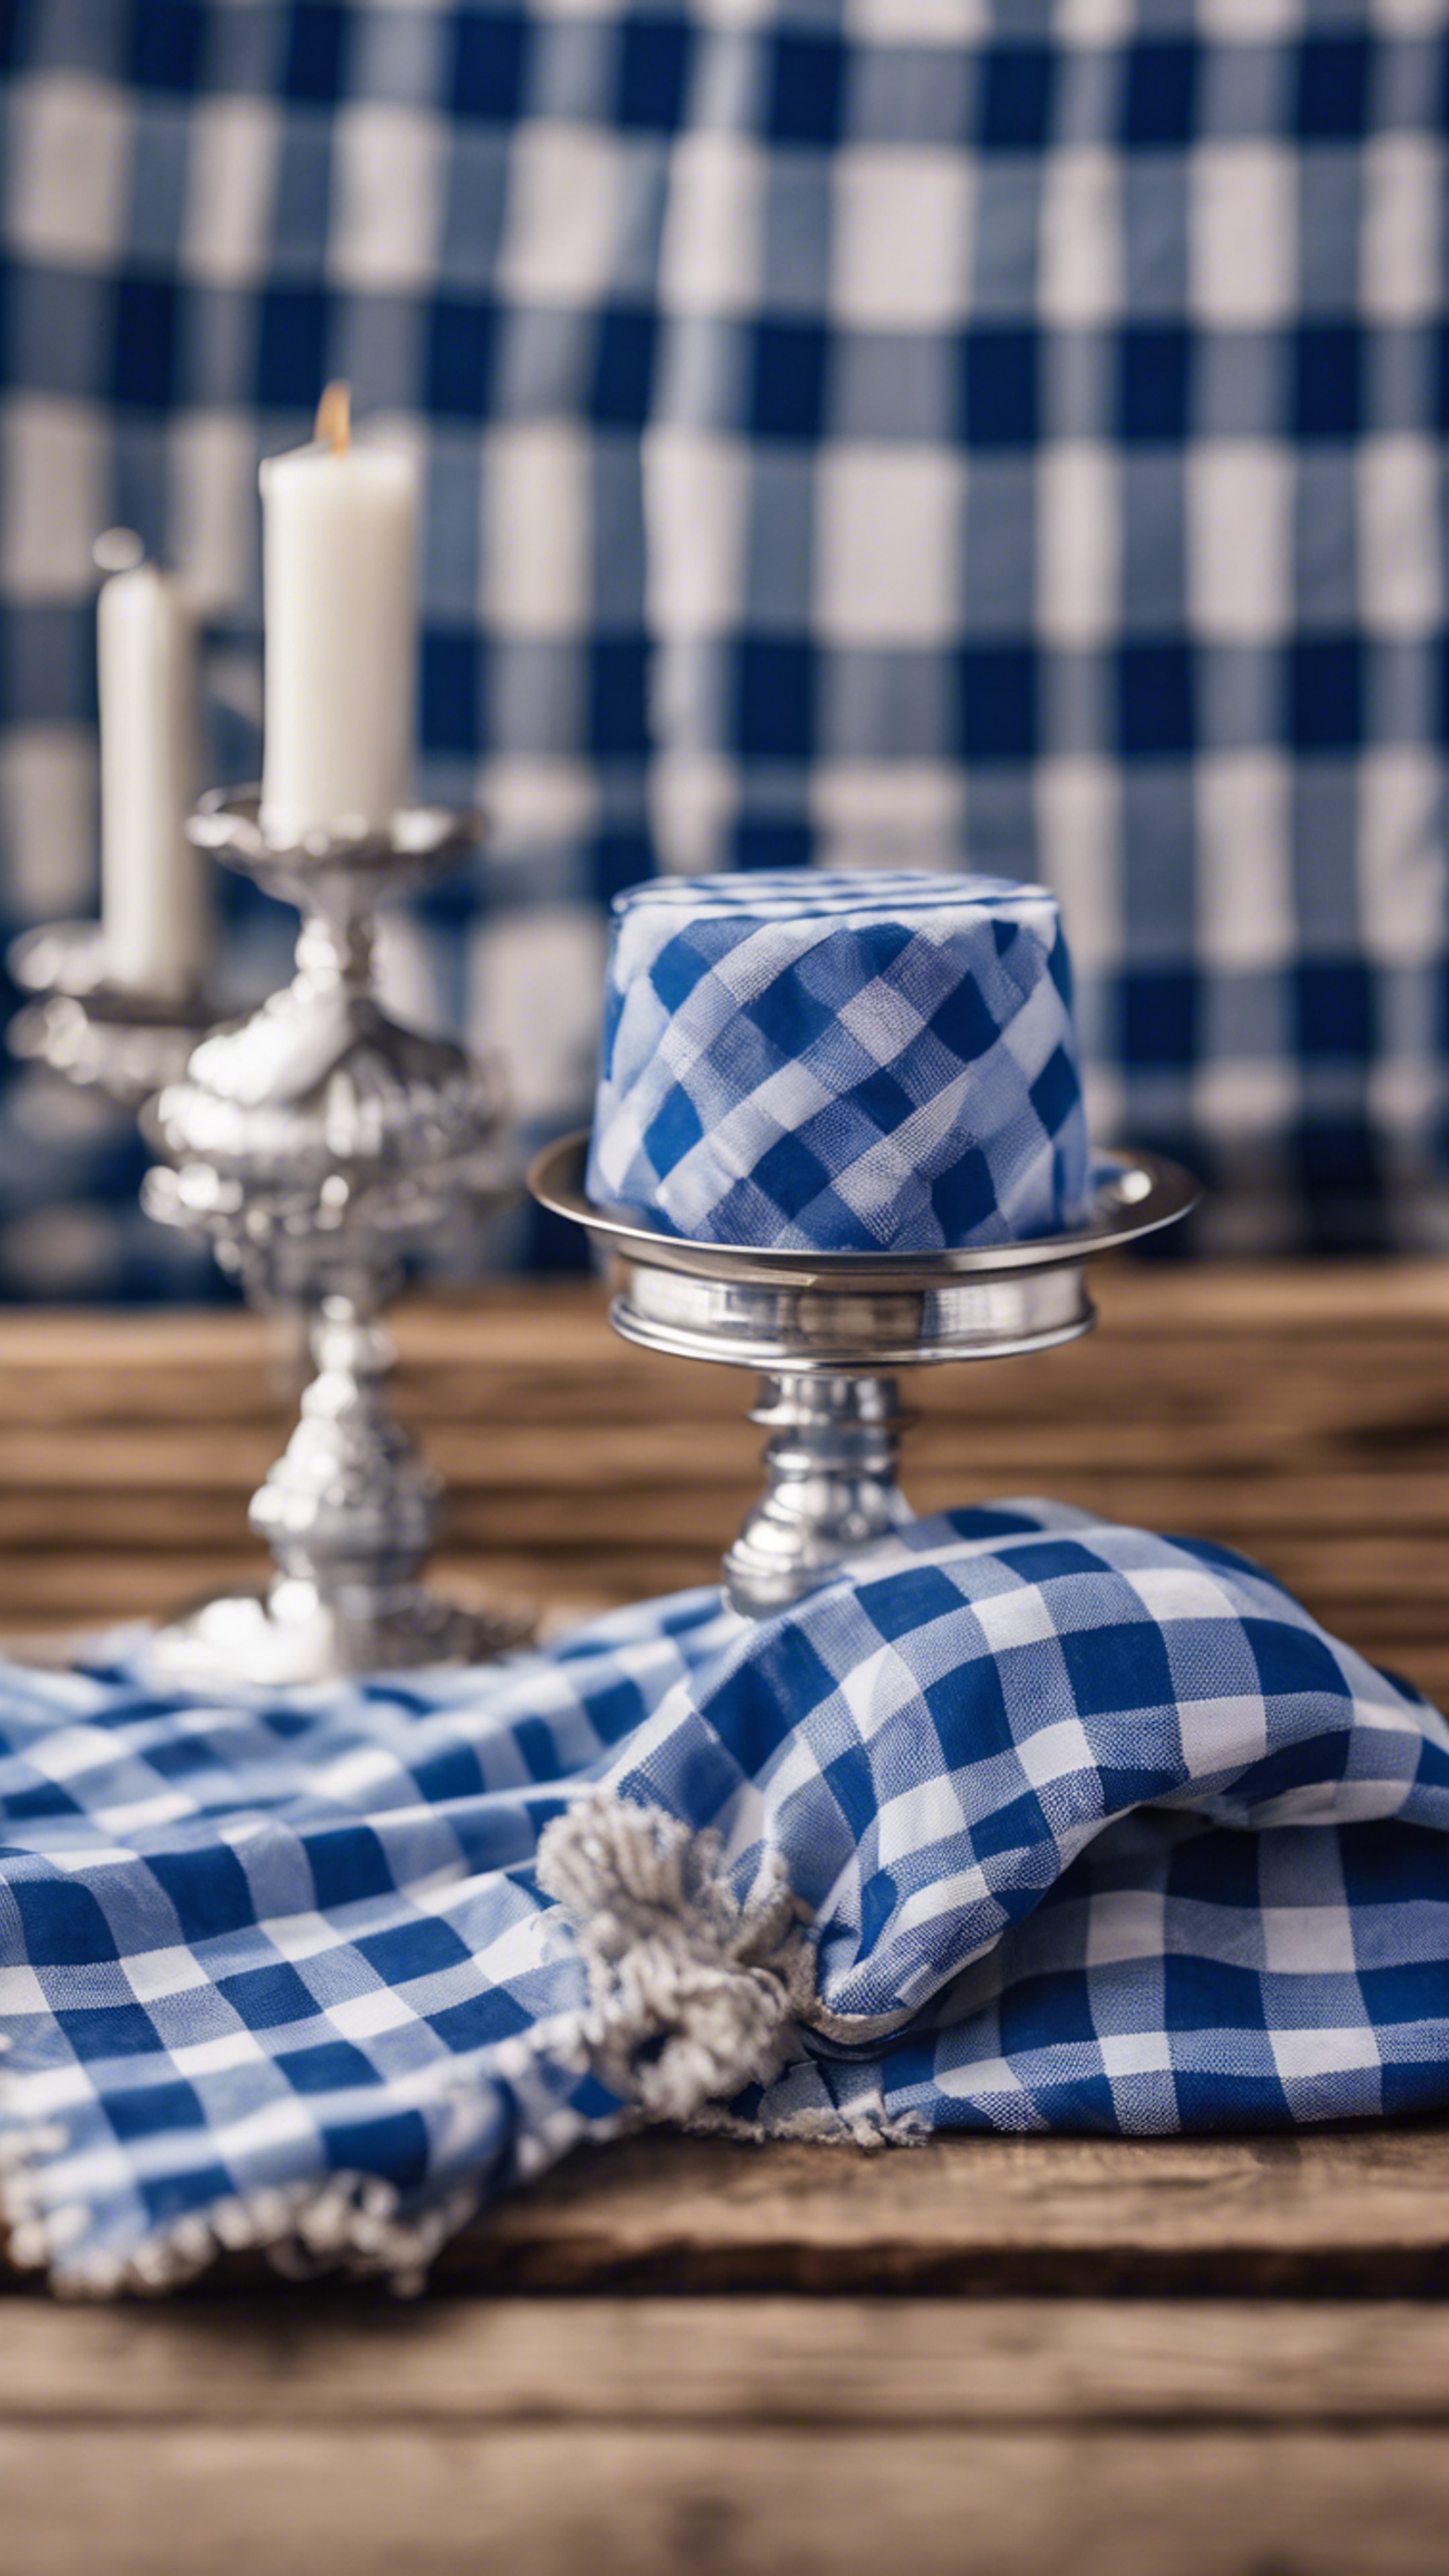 Classic blue checkered gingham fabric draped over a wooden table with a silver candelabra, evoking a preppy picnic scene. Шпалери[5483729deeeb4e2a9f91]